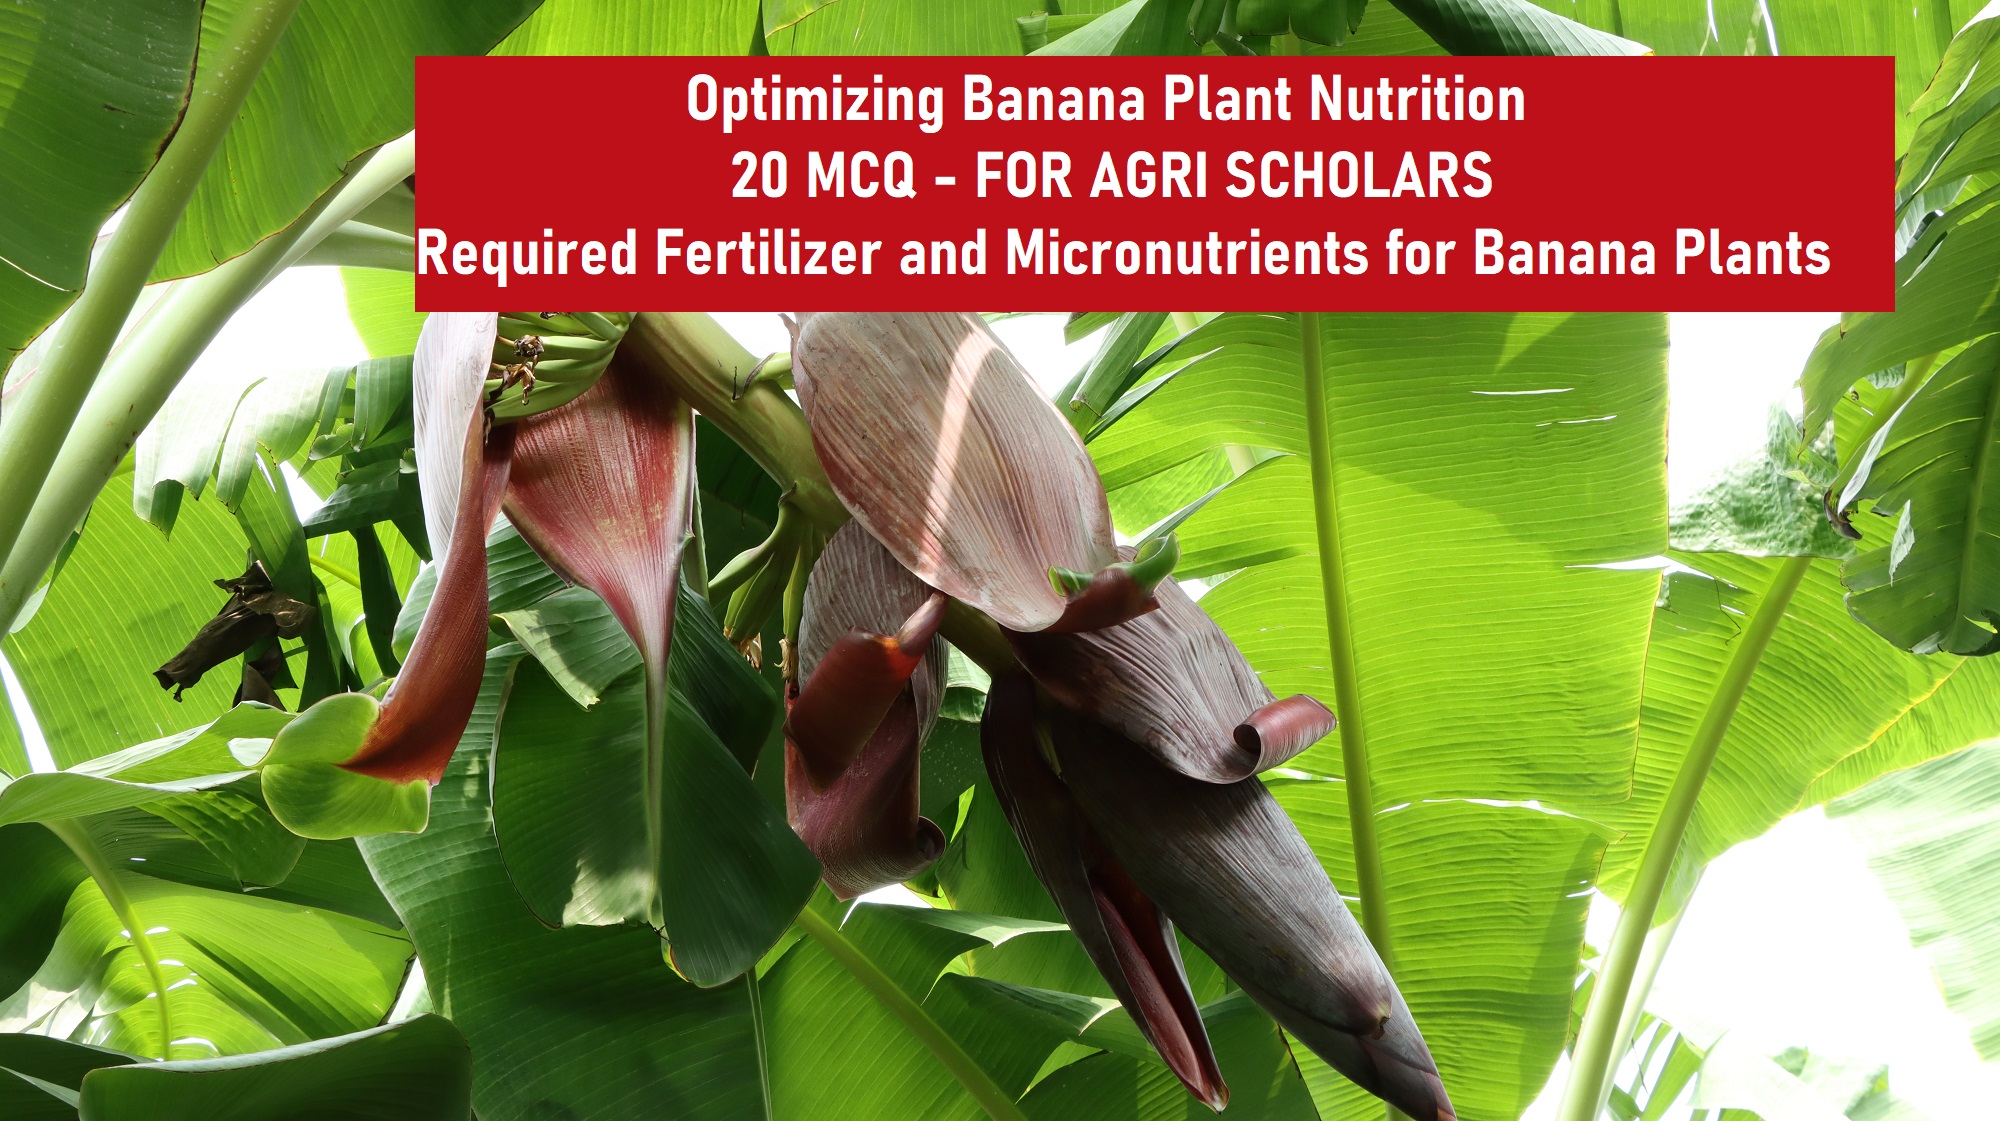 Optimizing Banana Plant Nutrition - 20 MCQ for Scholars - Required Fertilizer and Micronutrients for Banana Plants